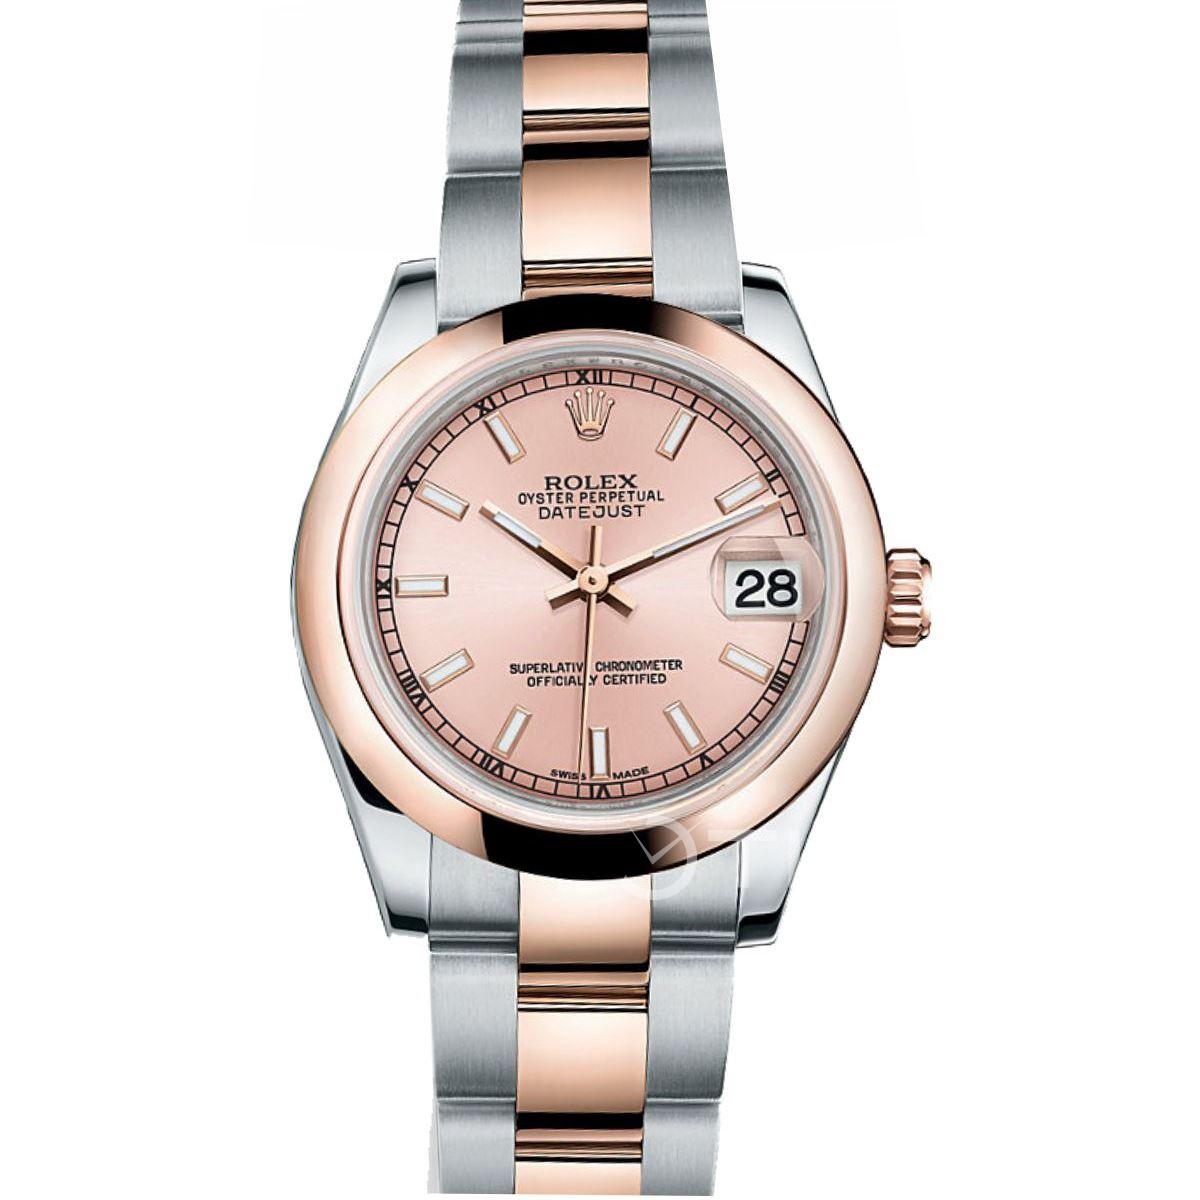 Mid Size Datejust - 2-Tone - Smooth Bezel - 31mm on Oyster Bracelet with Pink Stick Dial